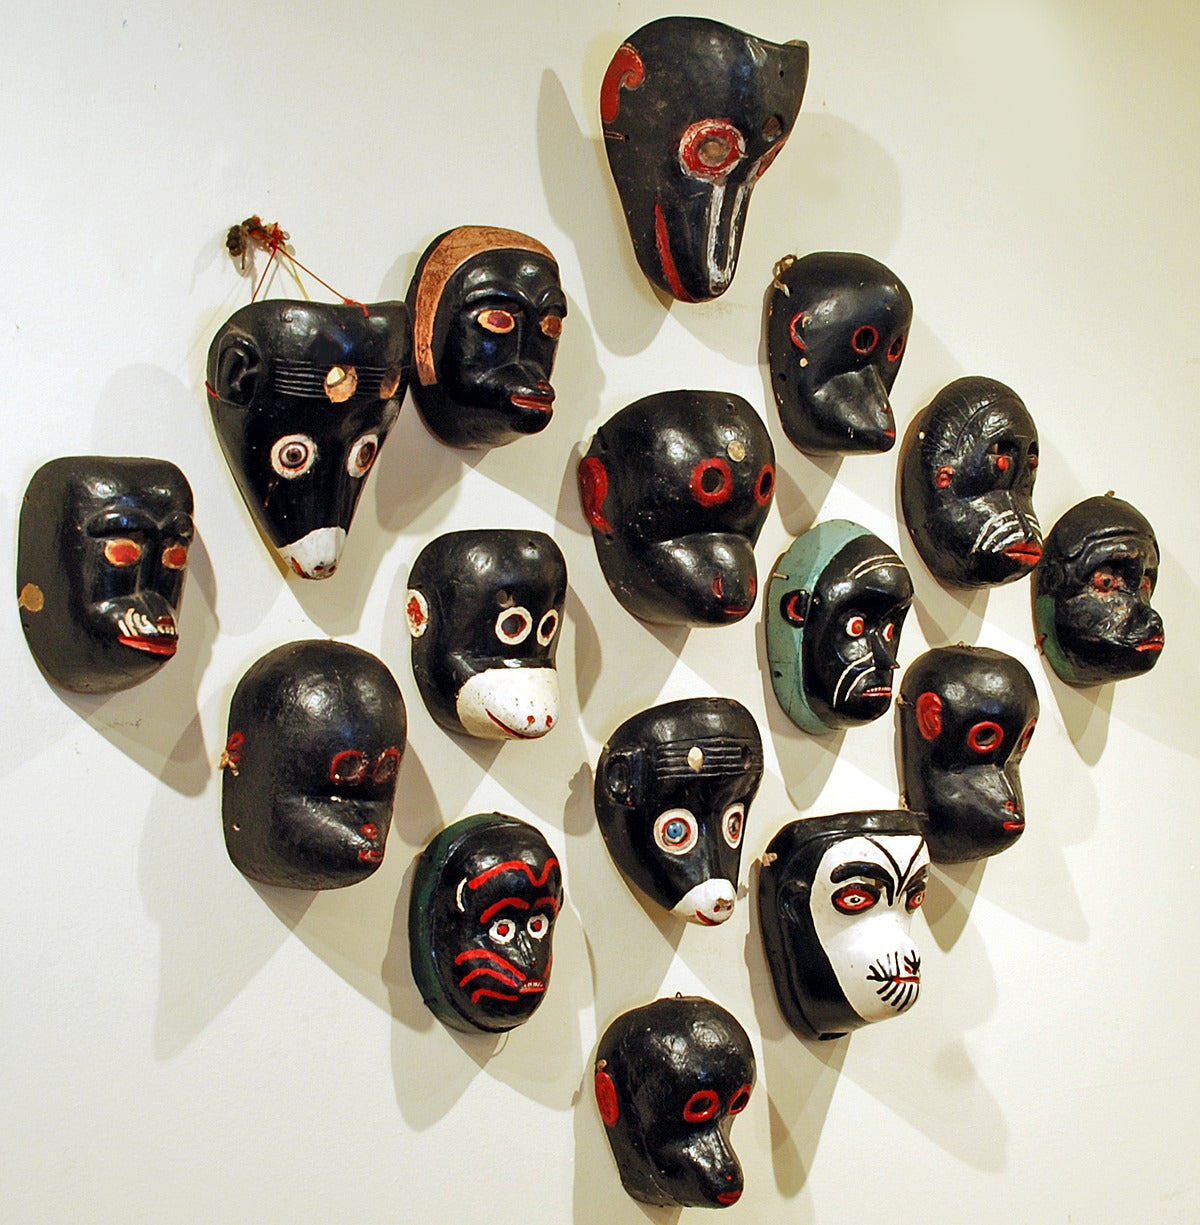 From a Tucson, Arizona collector, his lifetime collection of 16 outstanding early 20th century Guatemalan 'mico' and 'monkey' masks, used in the 'Costeño' and 'Baile de los Animales' Dances, circa 1930s and 1940s. Some with 'moreria' marks on